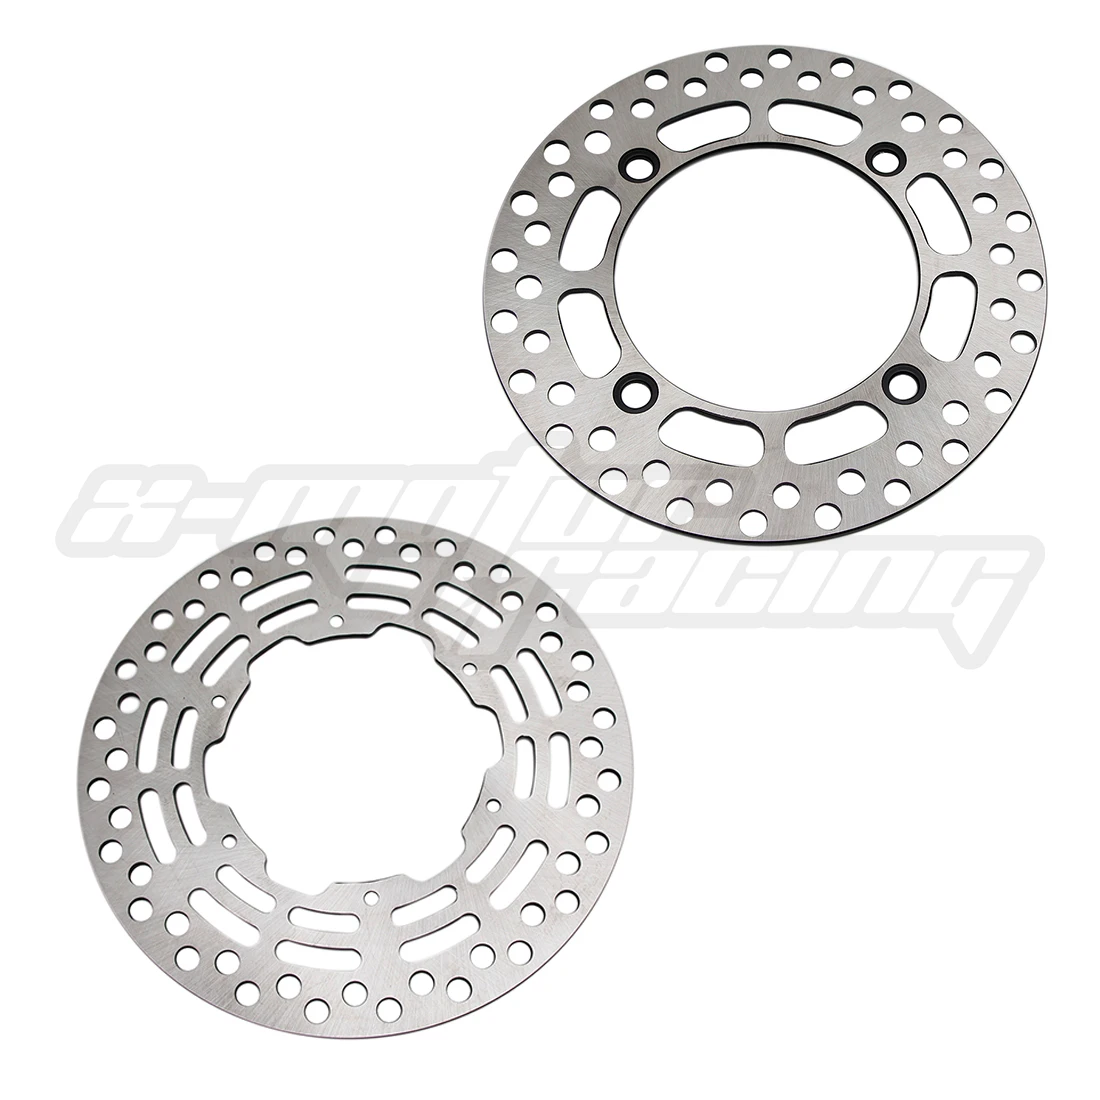 

Motorcycle Front And Rear Brake Discs Rotors For Suzuki DR 250 RXT/RXLT/RXV/RXLV/RXW/RXLW/RXGW/RXGLW/RXY/RXGY 1996 - 1998 1997